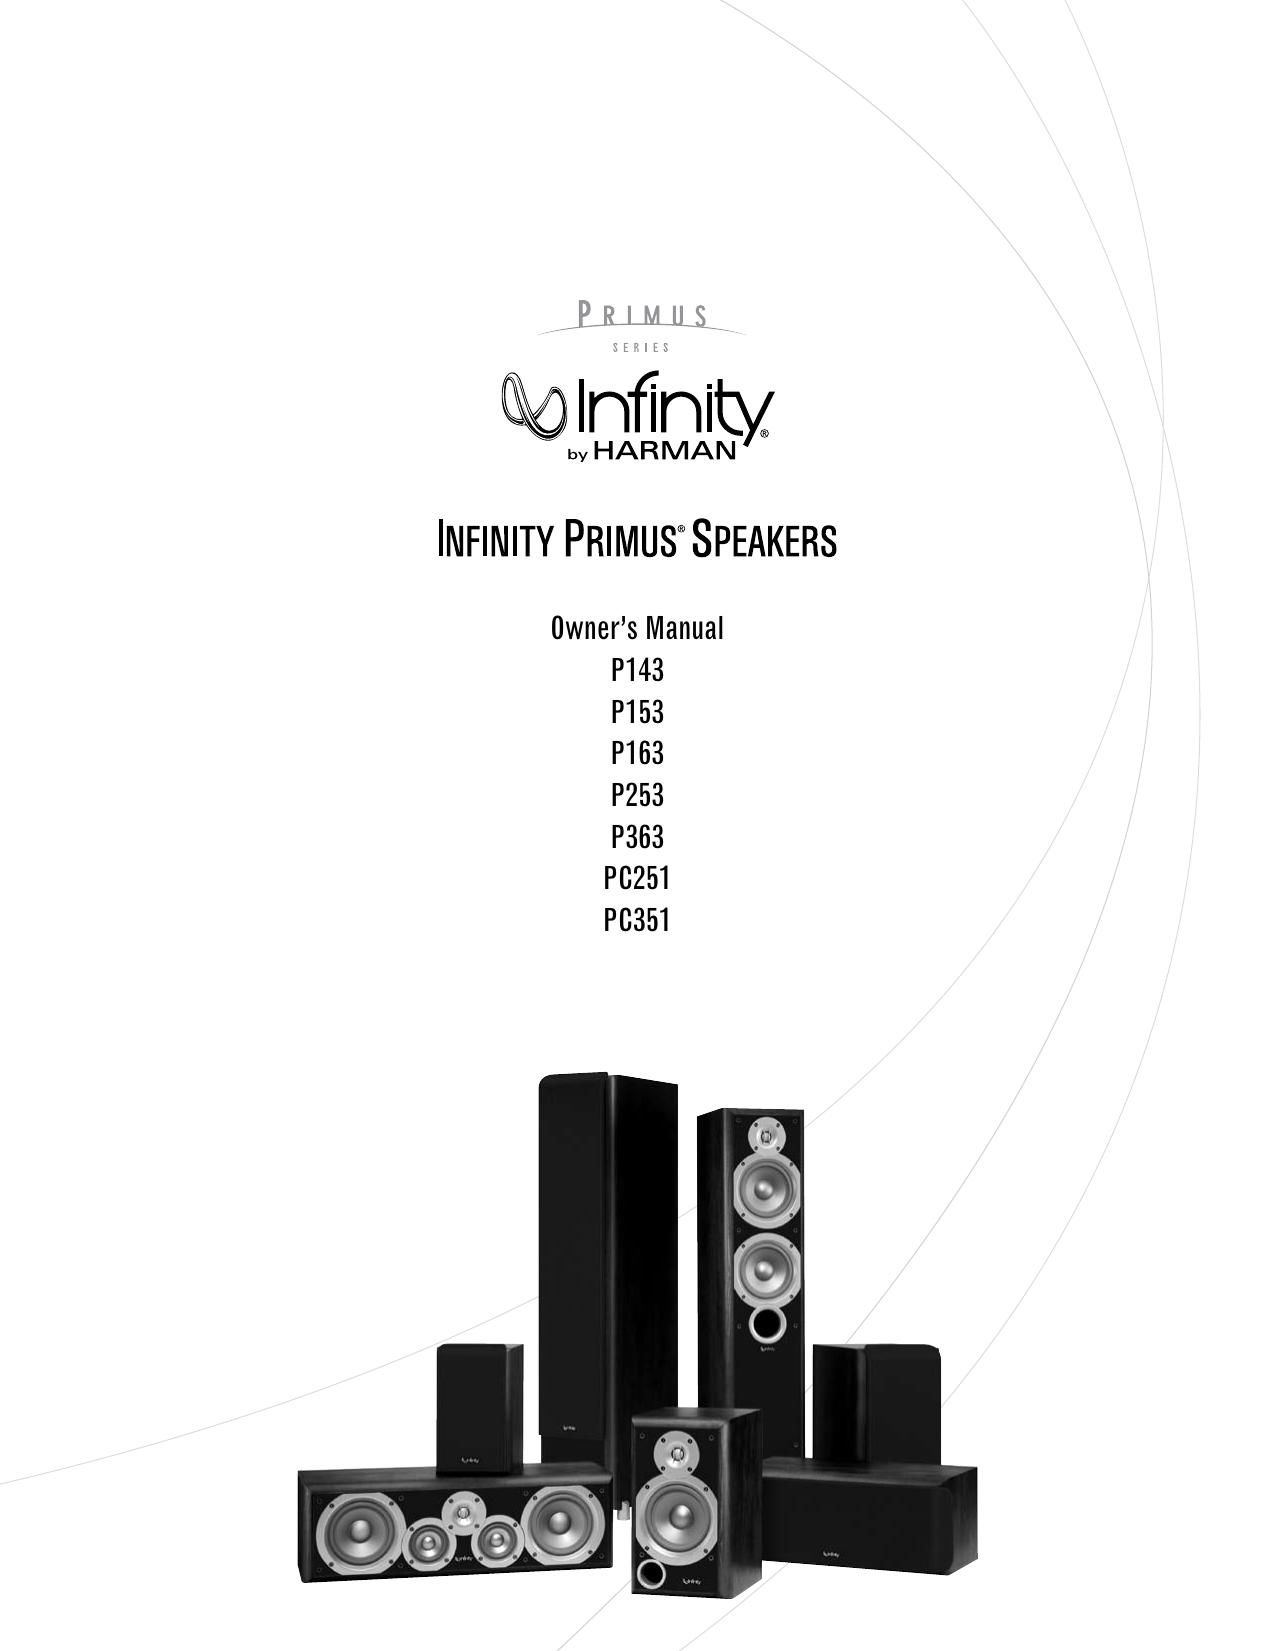 Infinity Primus PC 351 Owners Manual